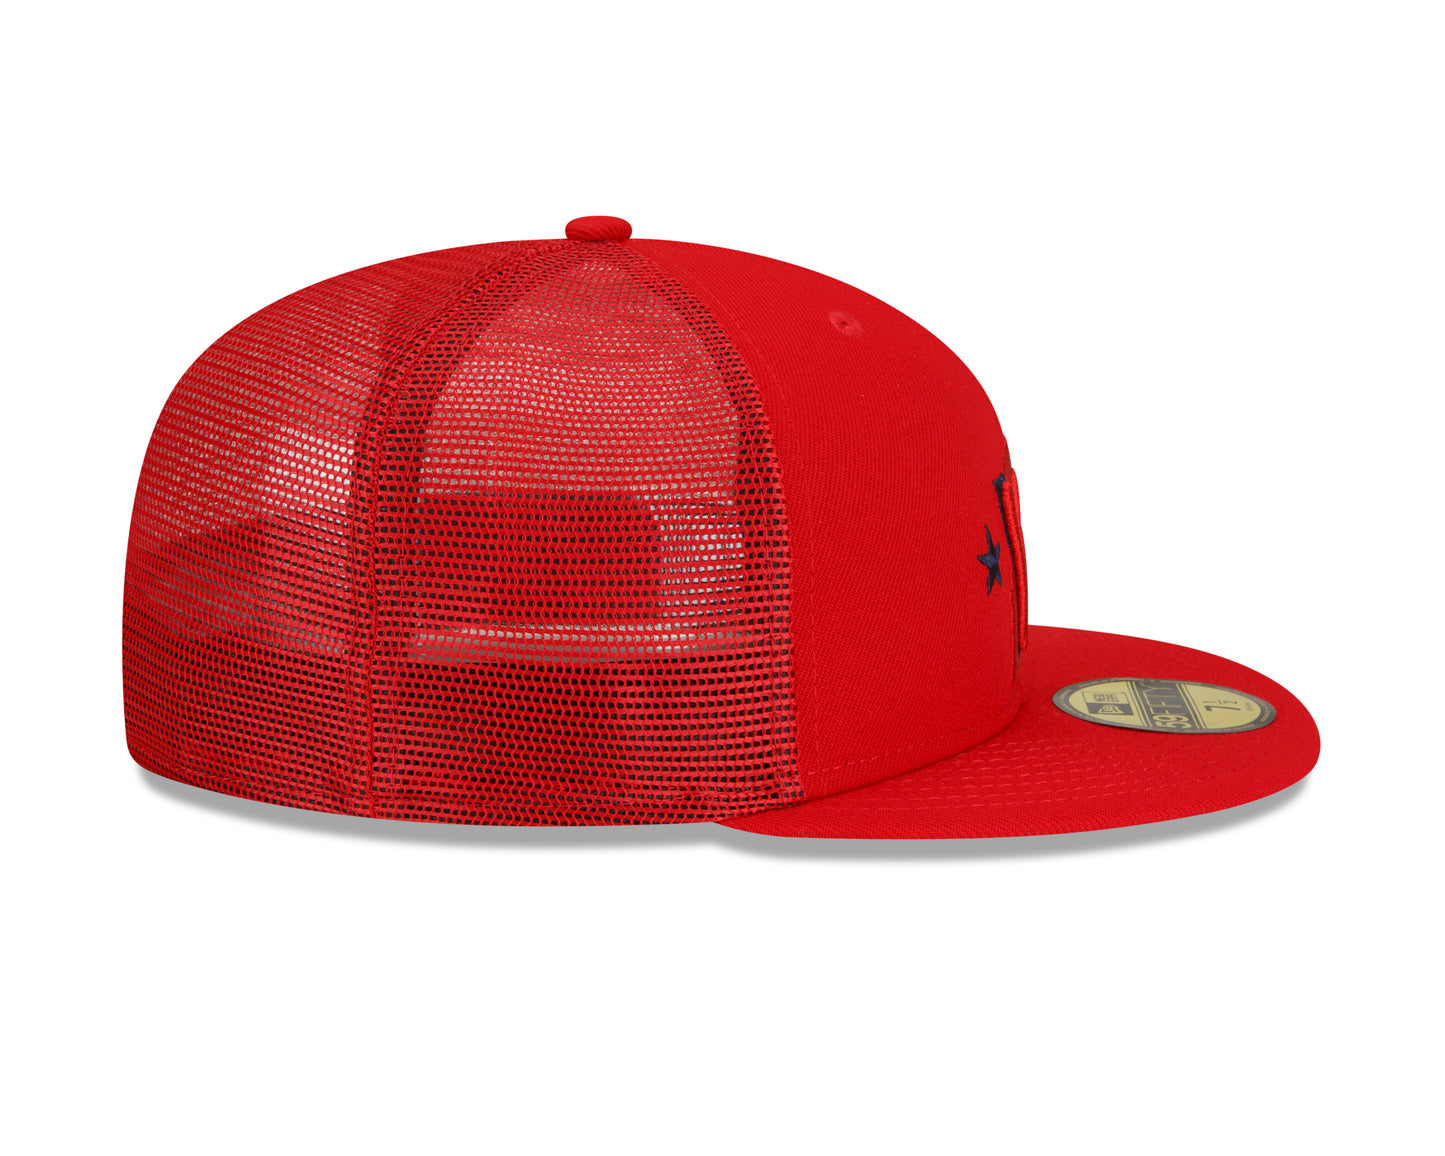 Washington Nationals New Era Batting Practice 59FIFTY Fitted Hat